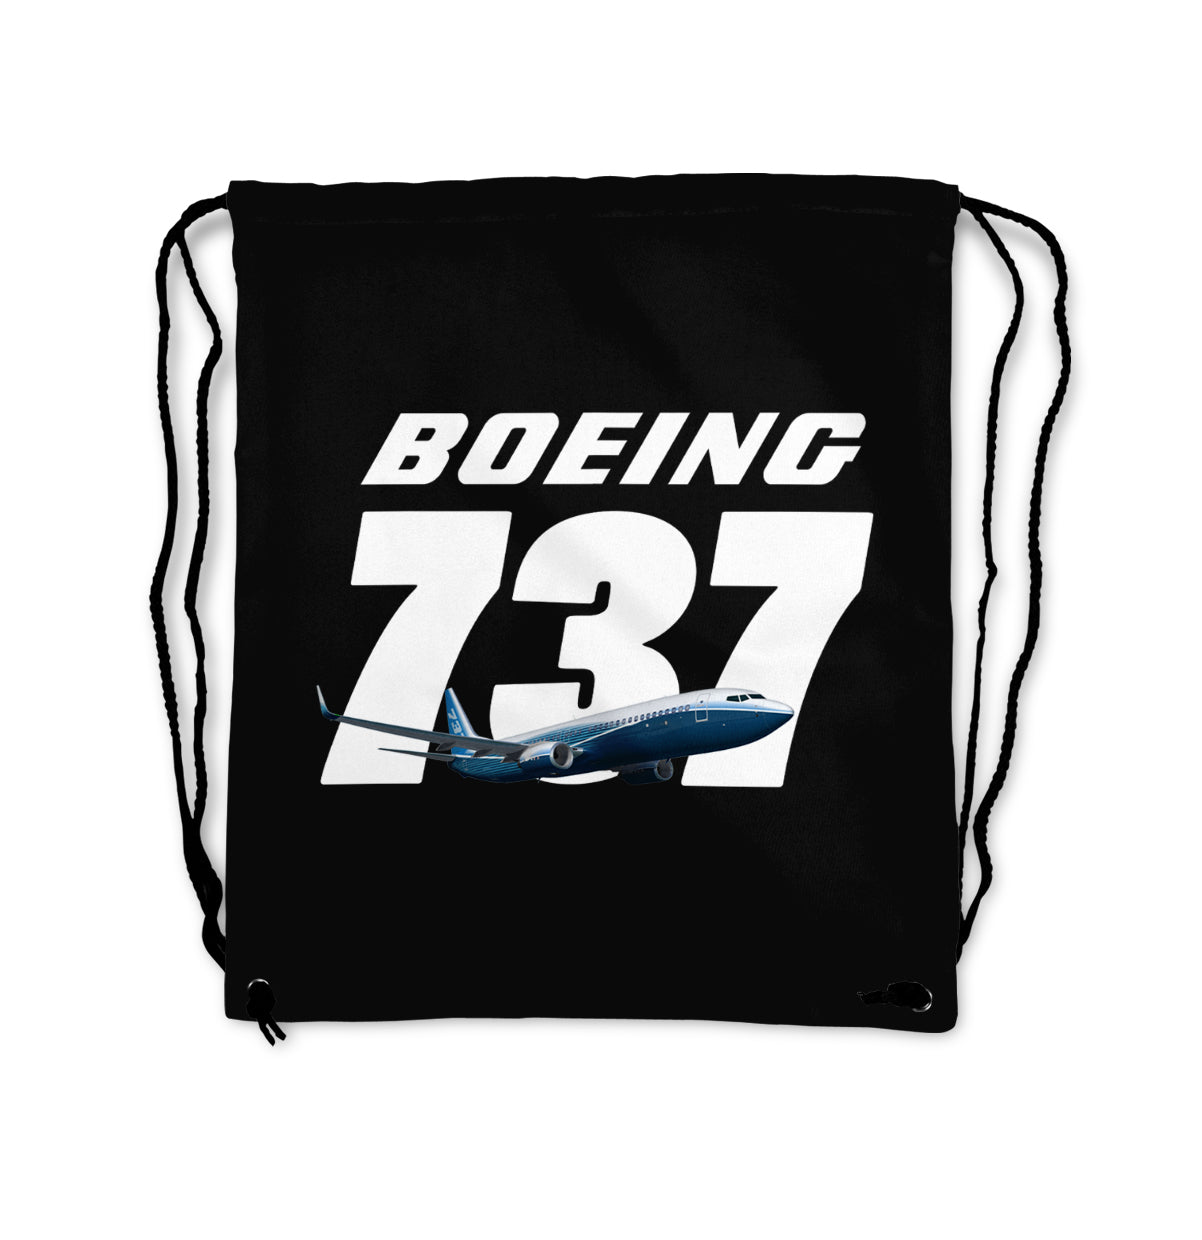 Super Boeing 737+Text Designed Drawstring Bags